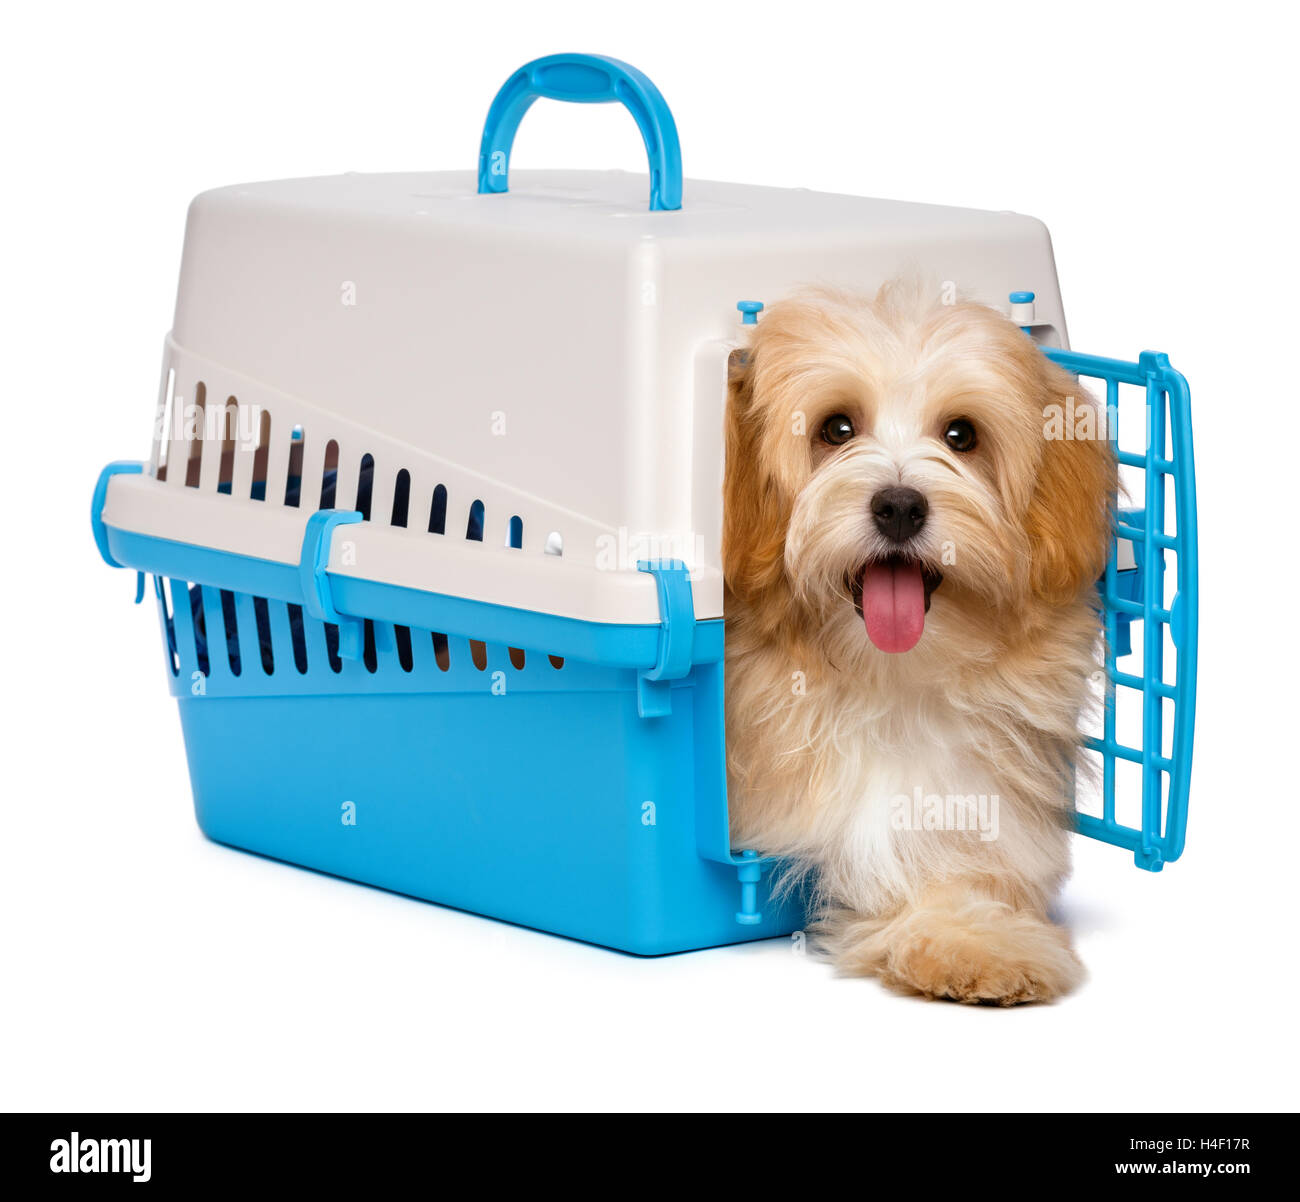 Cute happy havanese puppy dog is step out from a pet crate Stock Photo